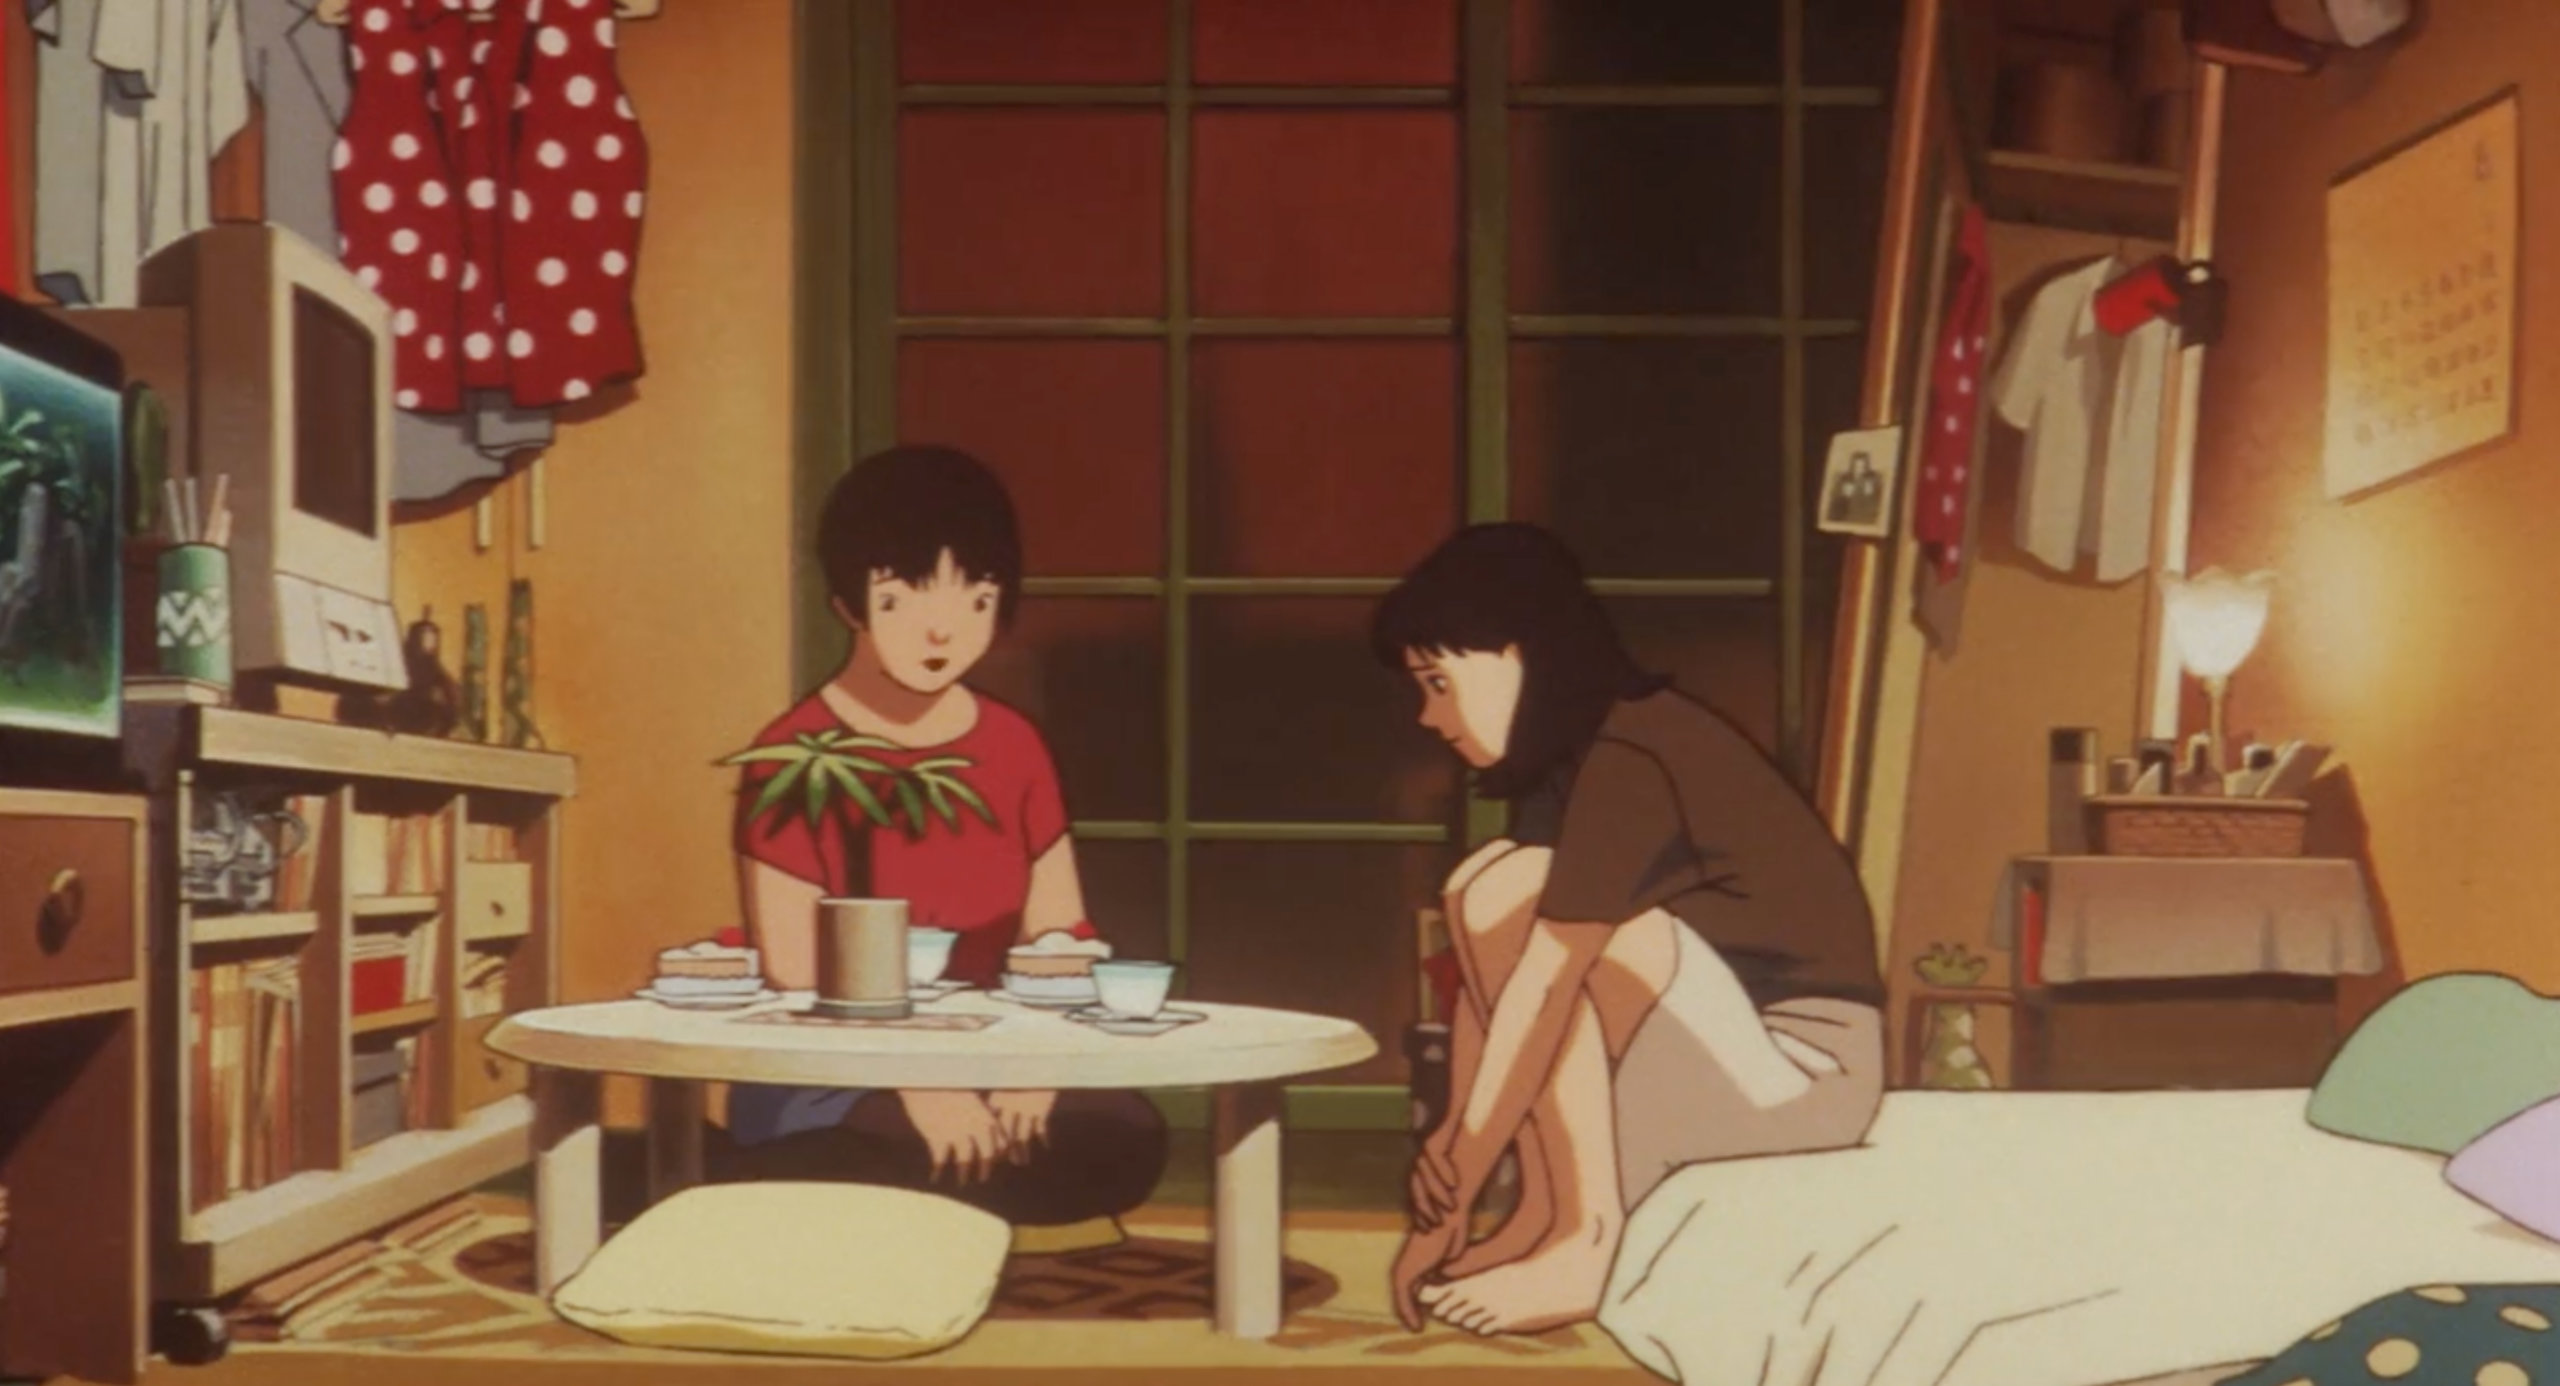 Rumi comforts Mima over cake and tea in Perfect Blue